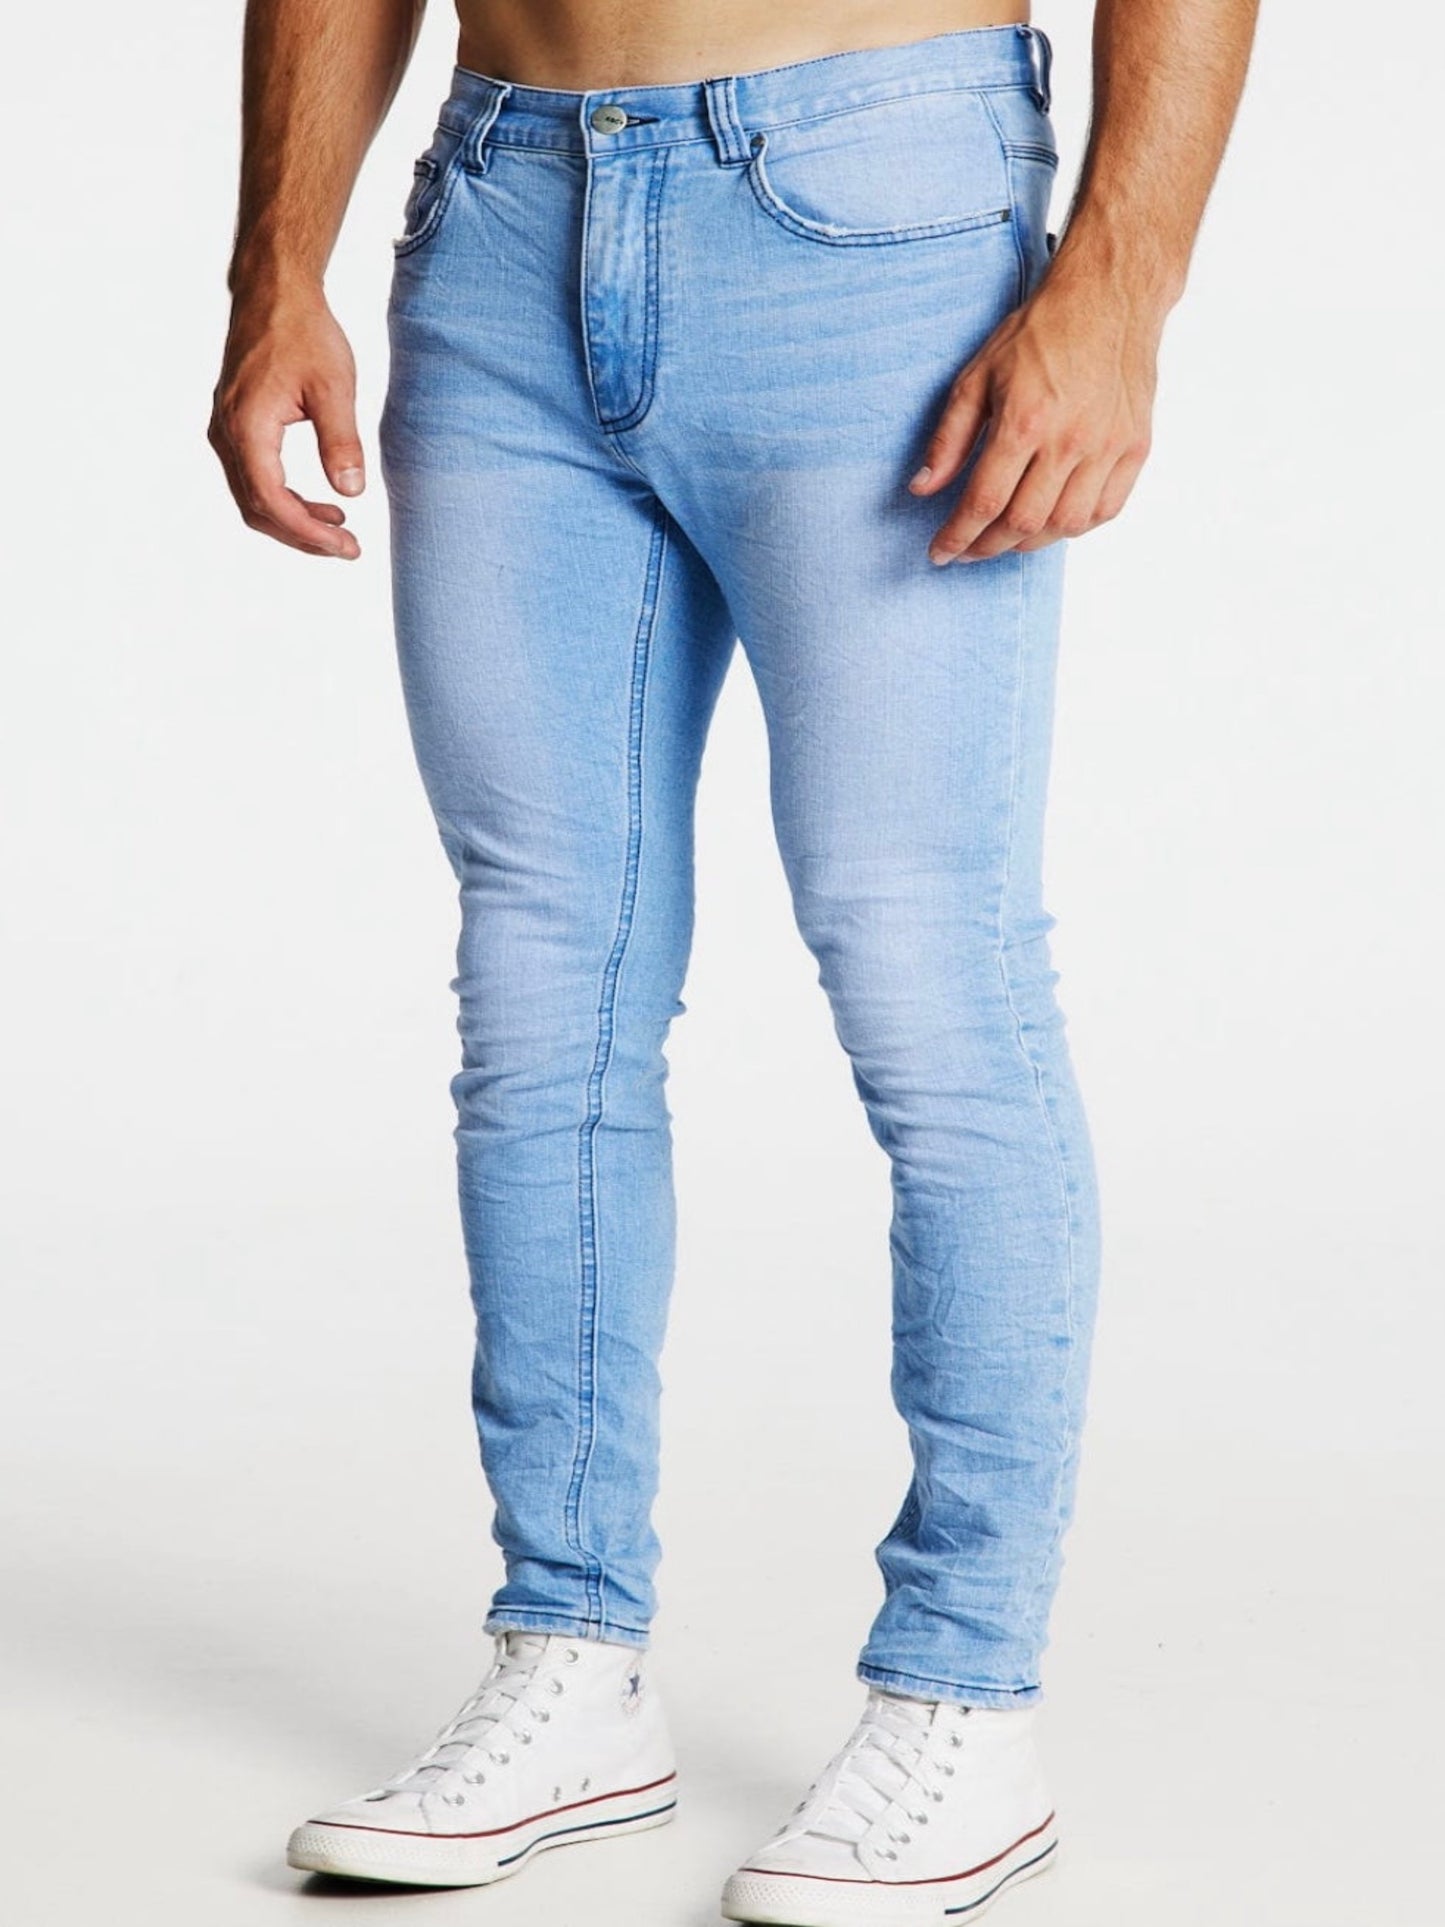 Kiss Chacey K1 Super Skinny Fit Jean- Crystal Blue